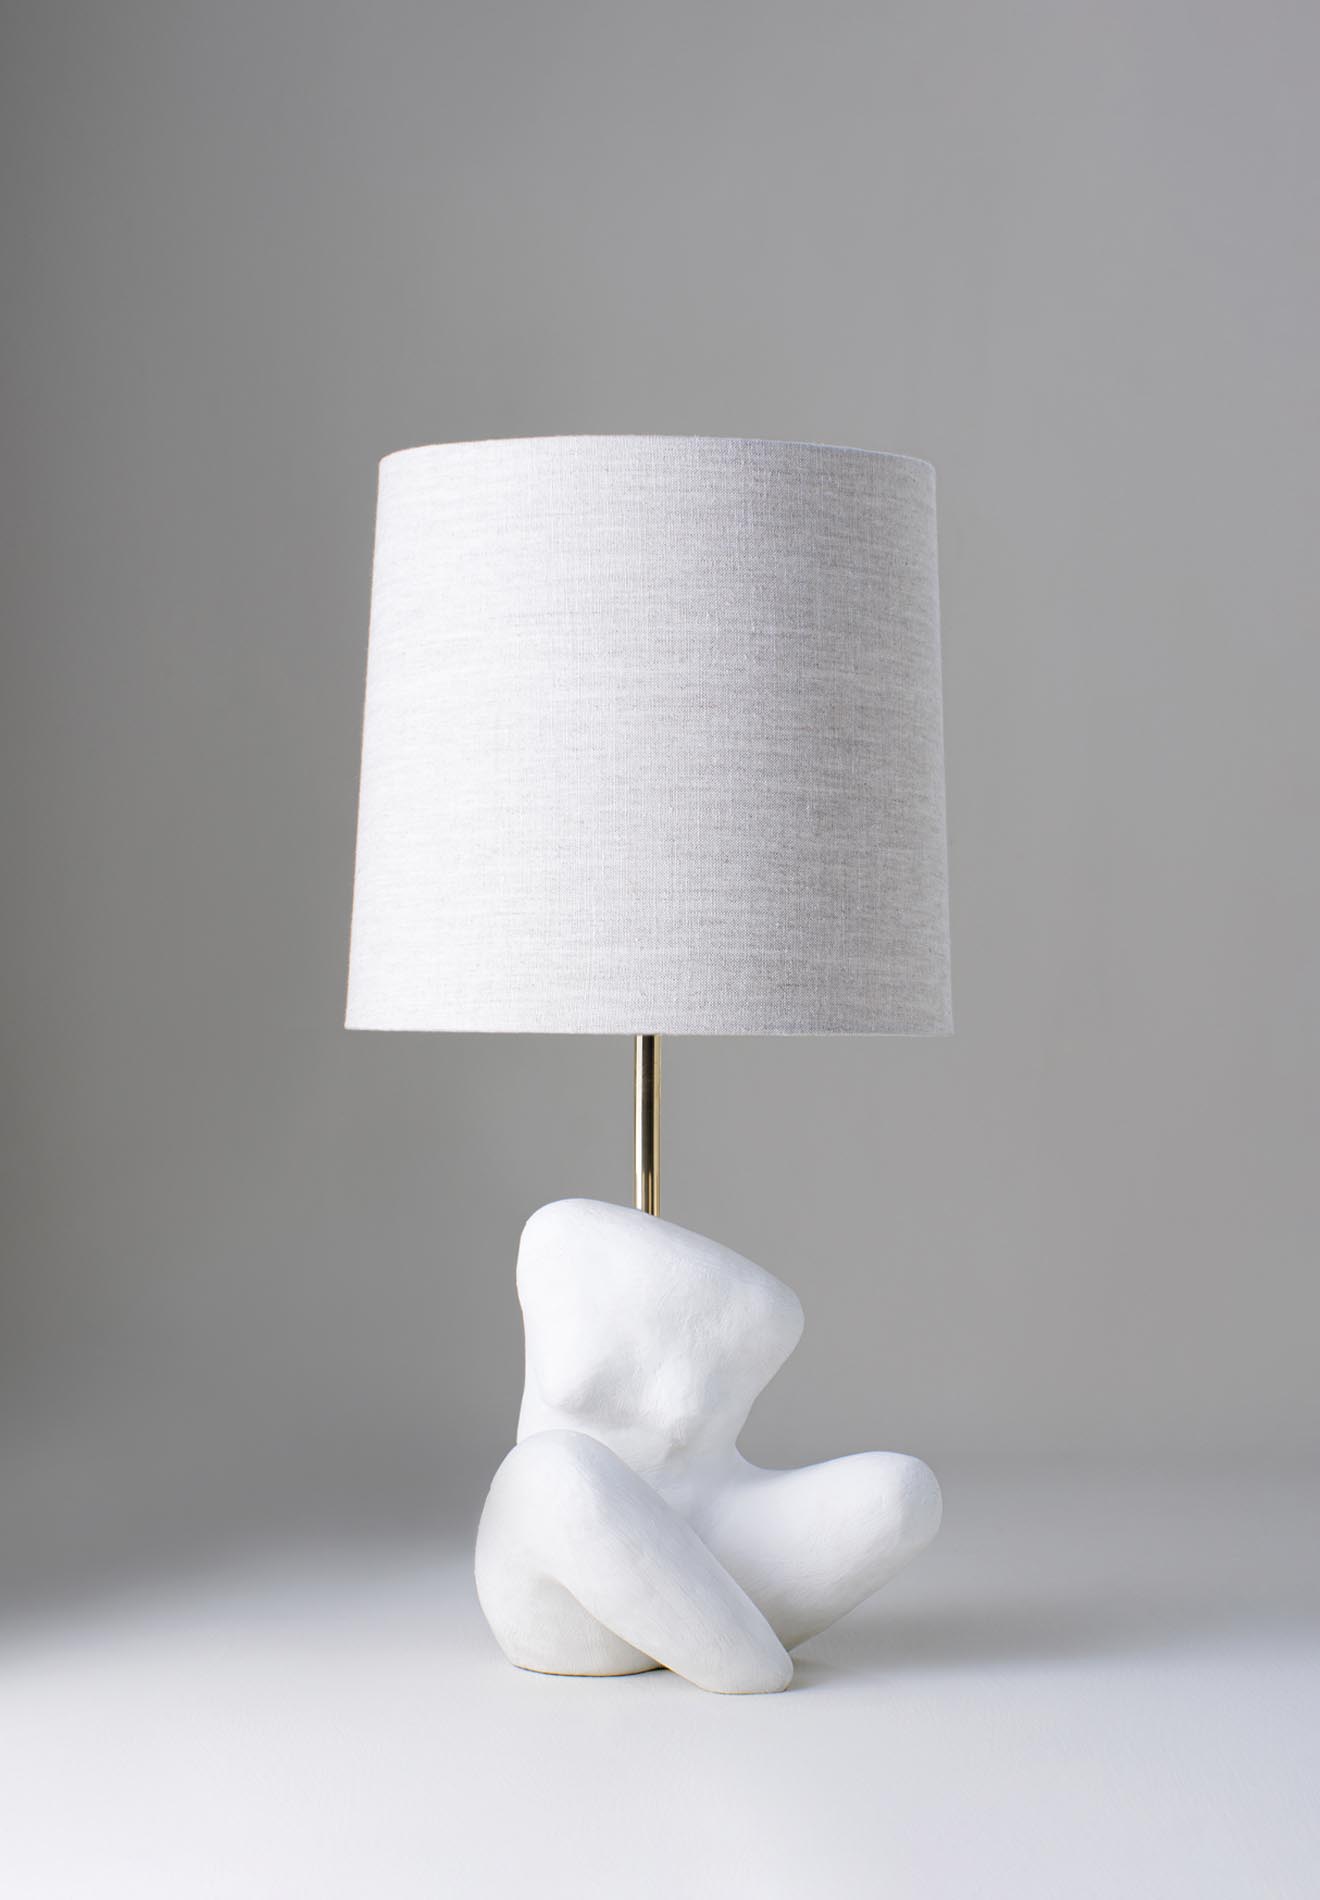 Plaster White shown in 12" Fez in Natural Linen and Cream Card Lining with Brass stem